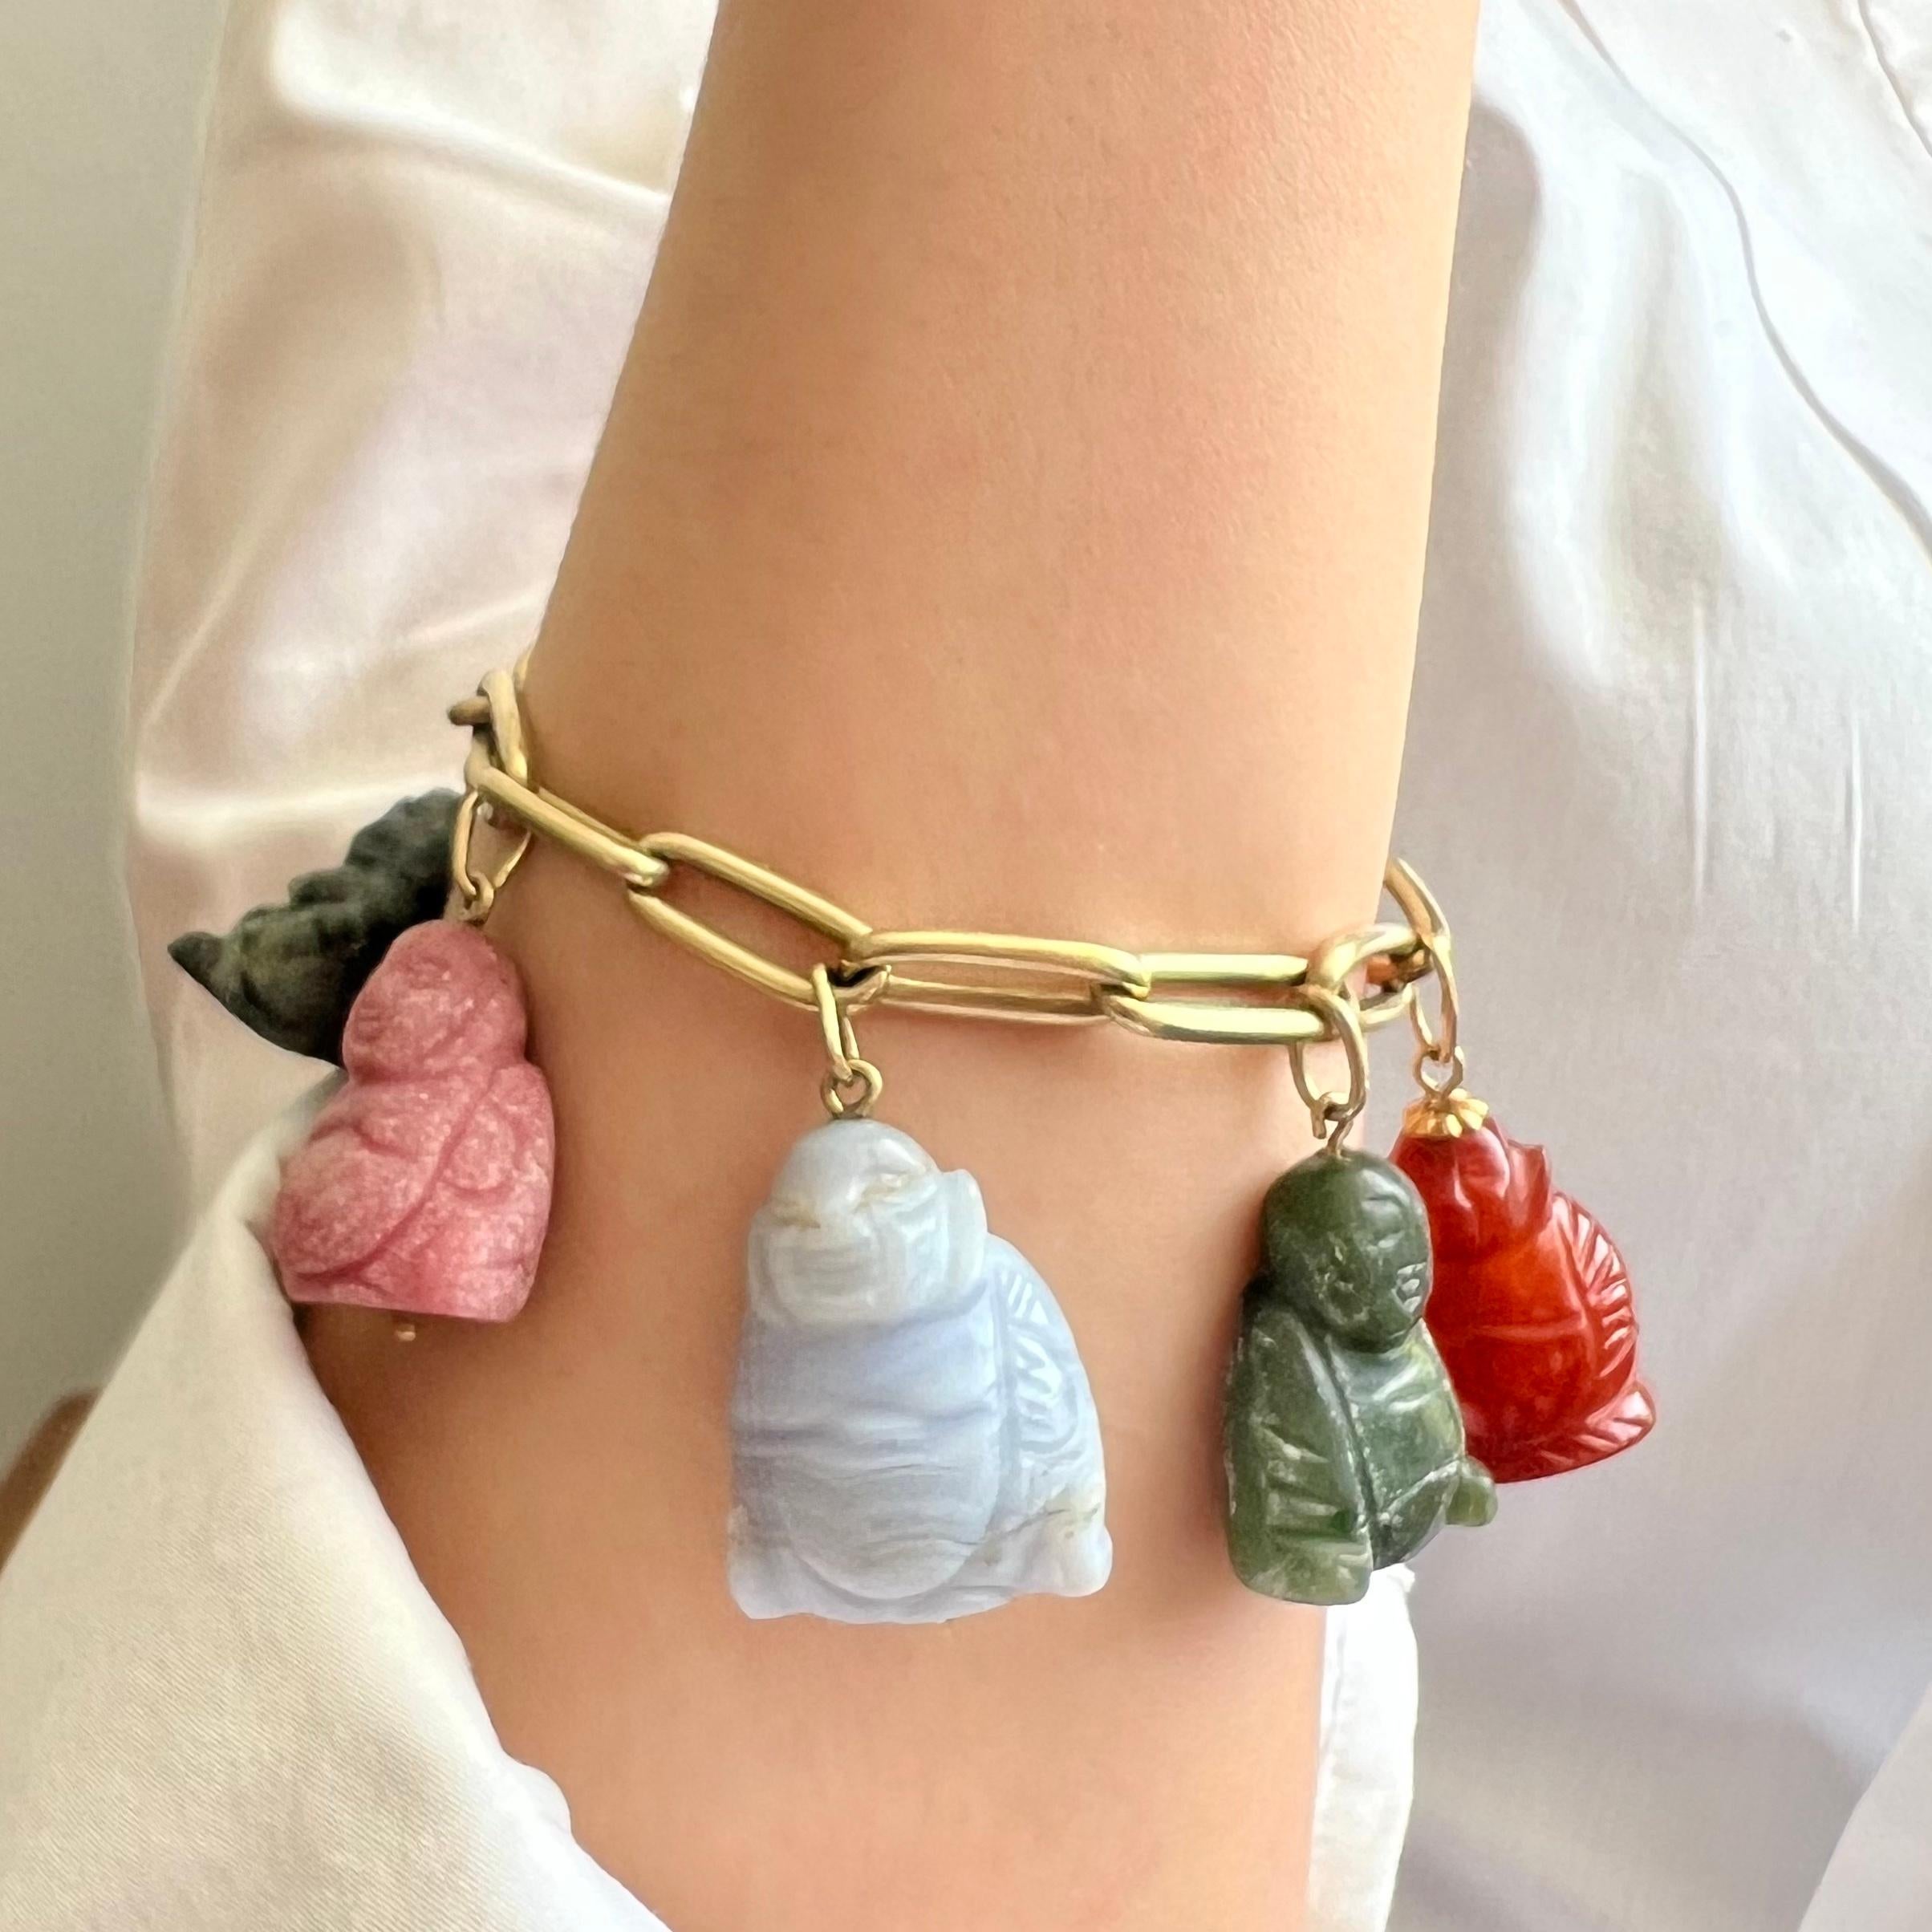 This charm bracelet is superb with these six Buddha's and a Dutch coin attached to a gold closed forever link chain. The six colorful Buddha's consist of different types of gemstones including; jade, rhodonite, blue lace agate and moss agate. The